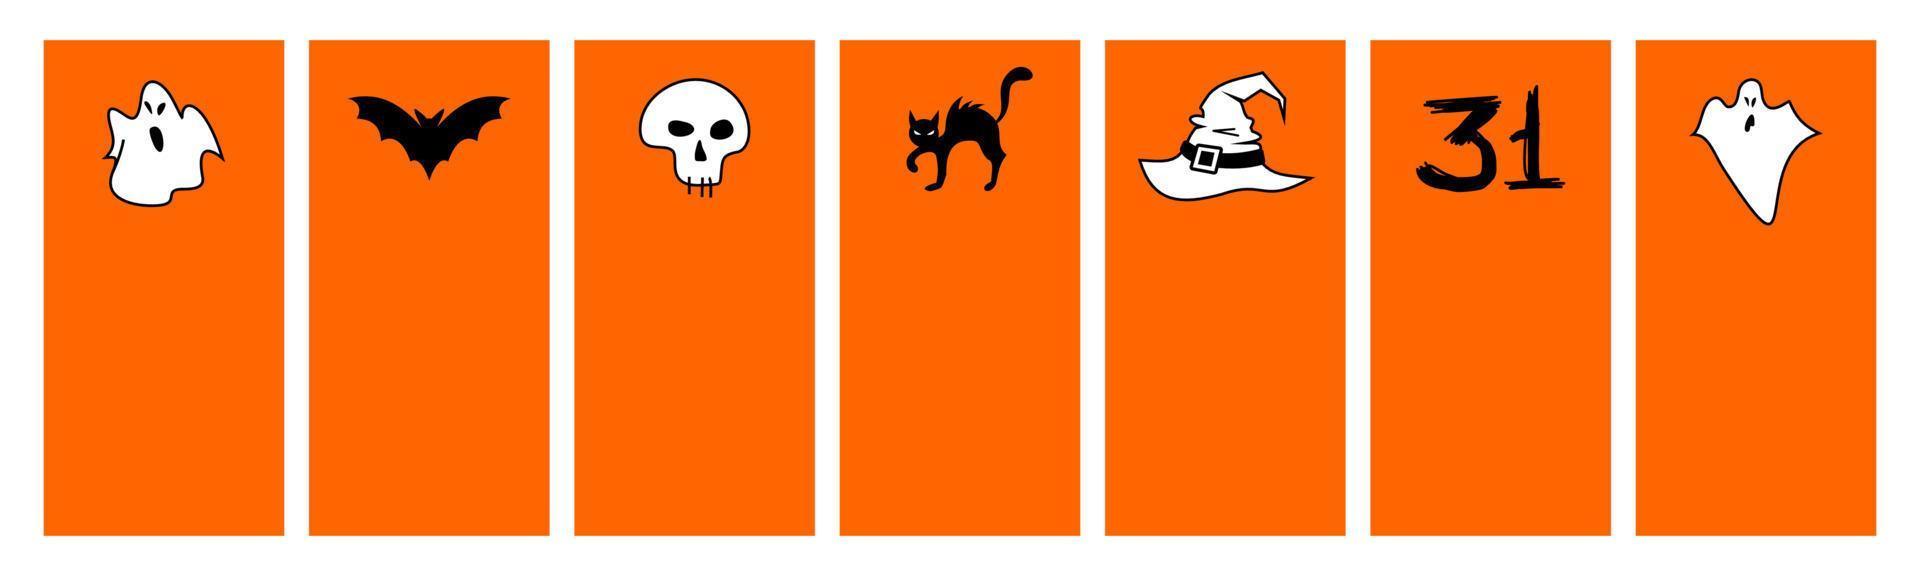 halloween icons. halloween banner colorful square - vector flat style illustration. frame, place for text. bat, ghosts